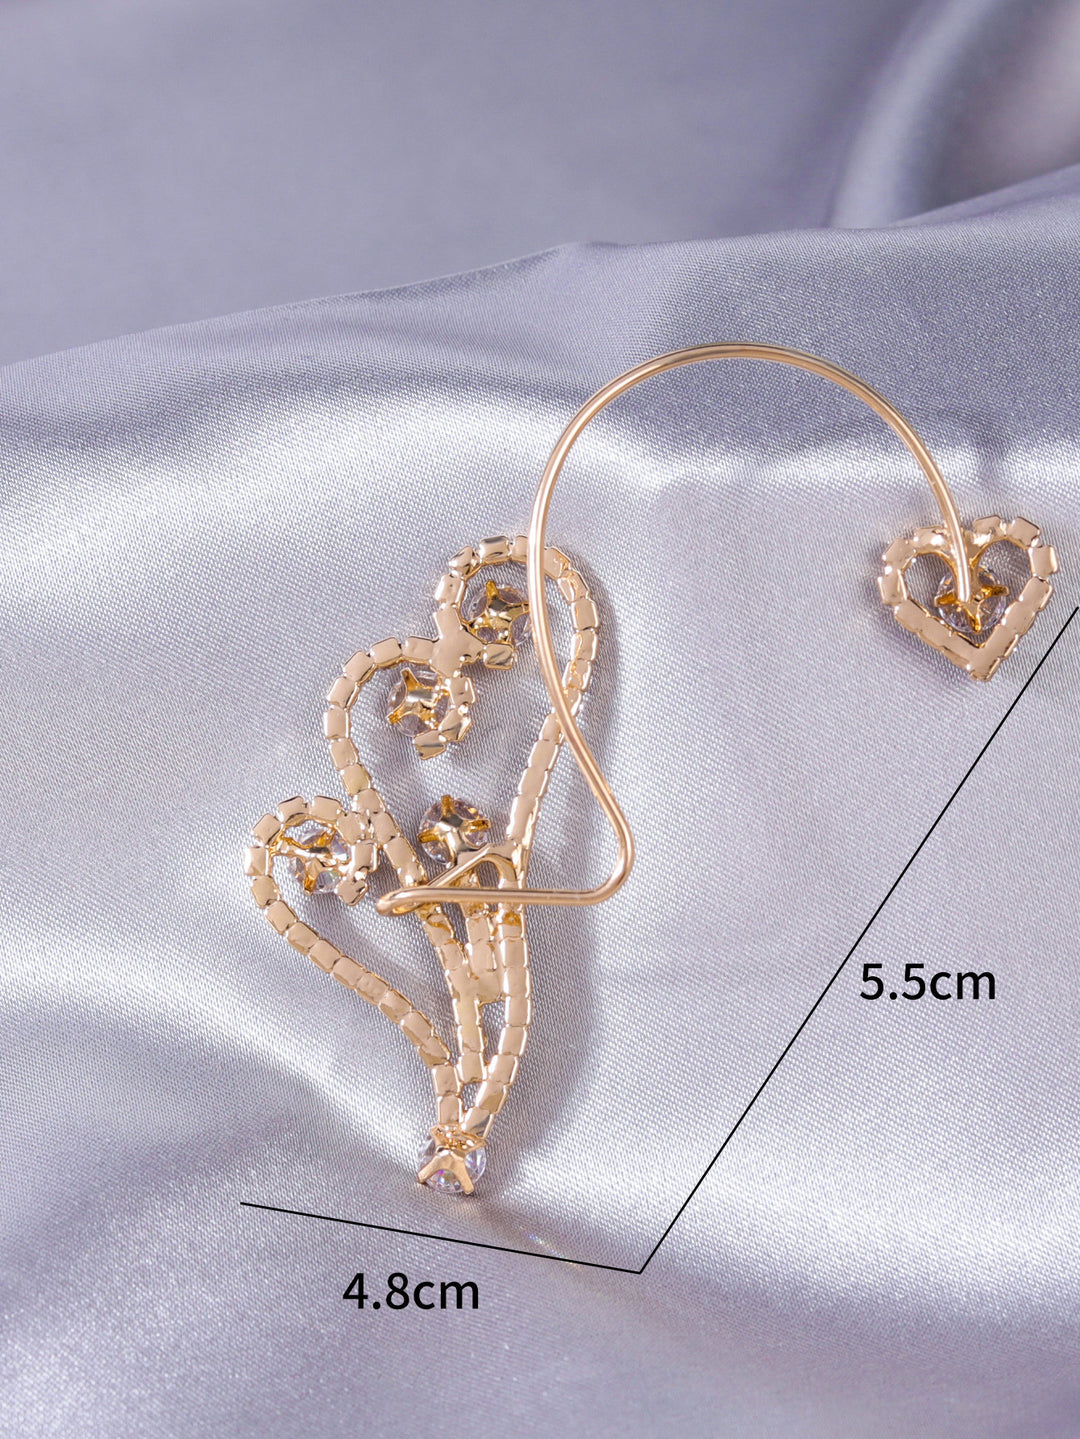 European And American Style Personality All-match Temperament Niche Earrings